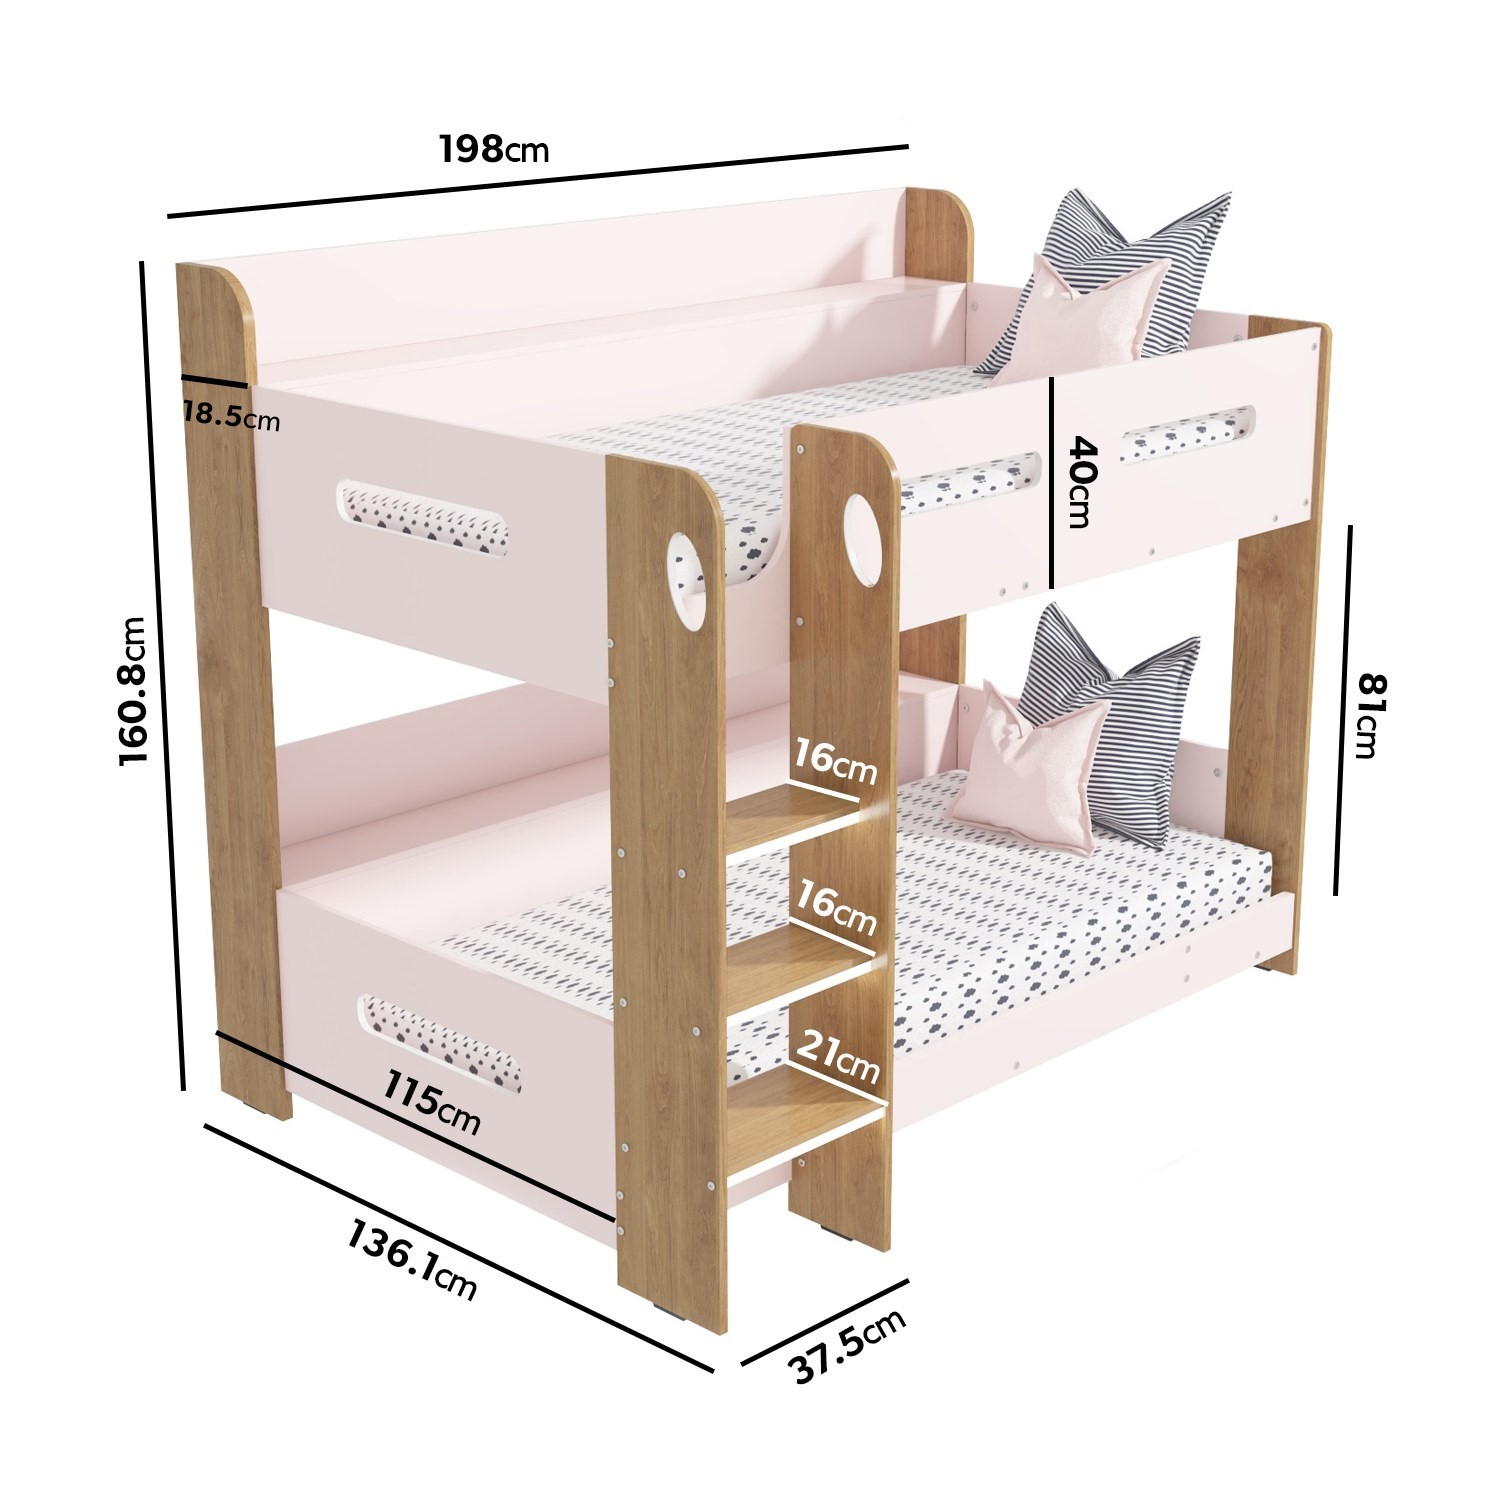 Read more about Pink and oak bunk bed with shelves sky